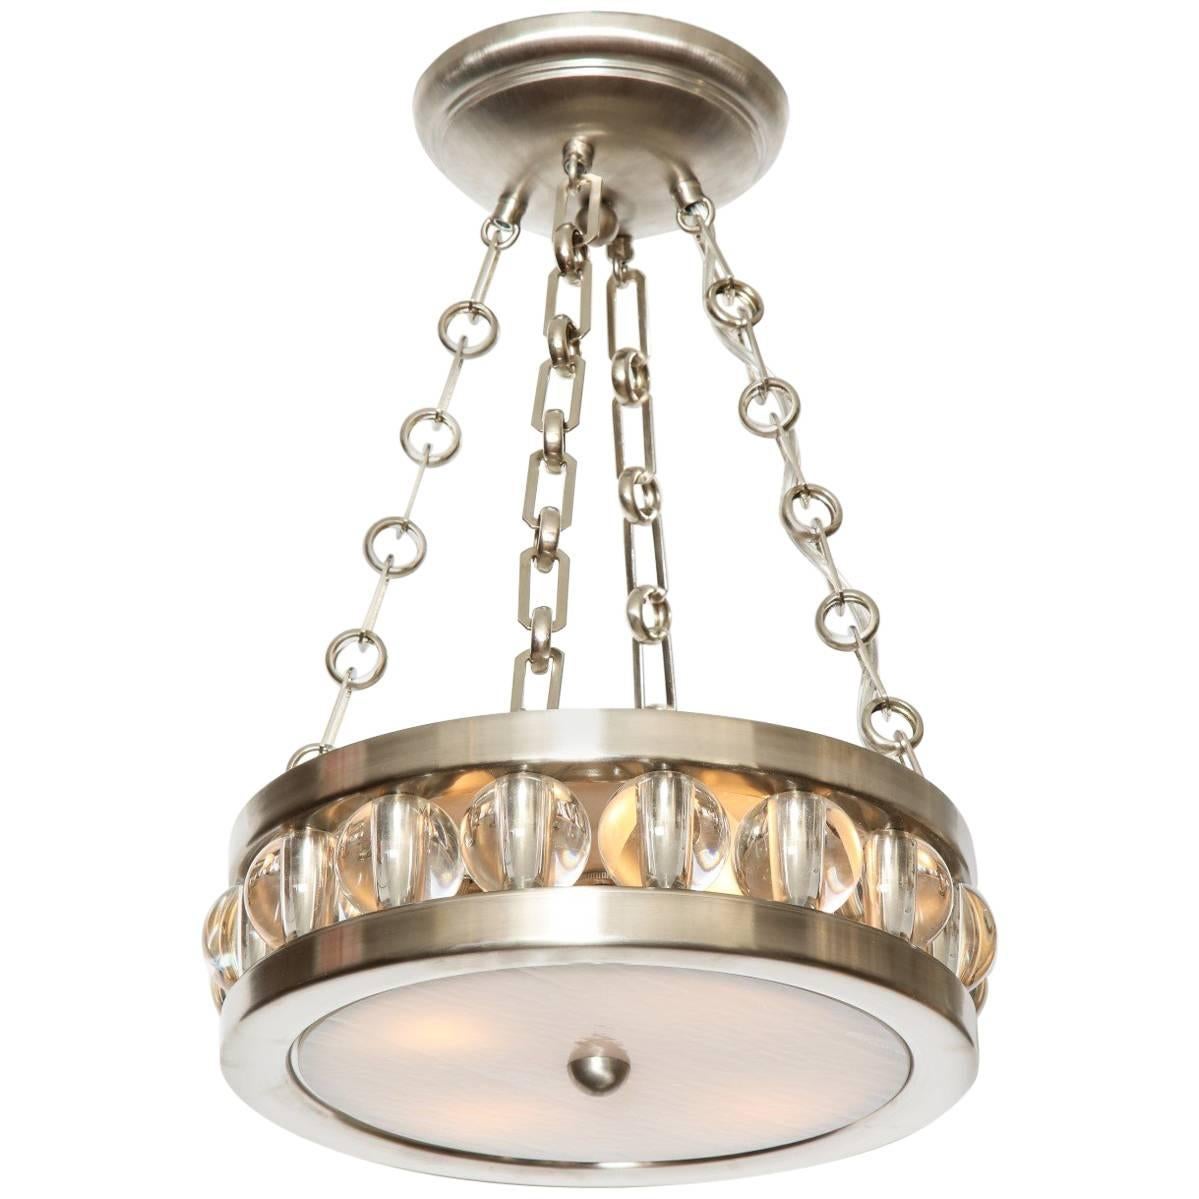 Tambour Pendant Light with Chain, by David Duncan Studio For Sale